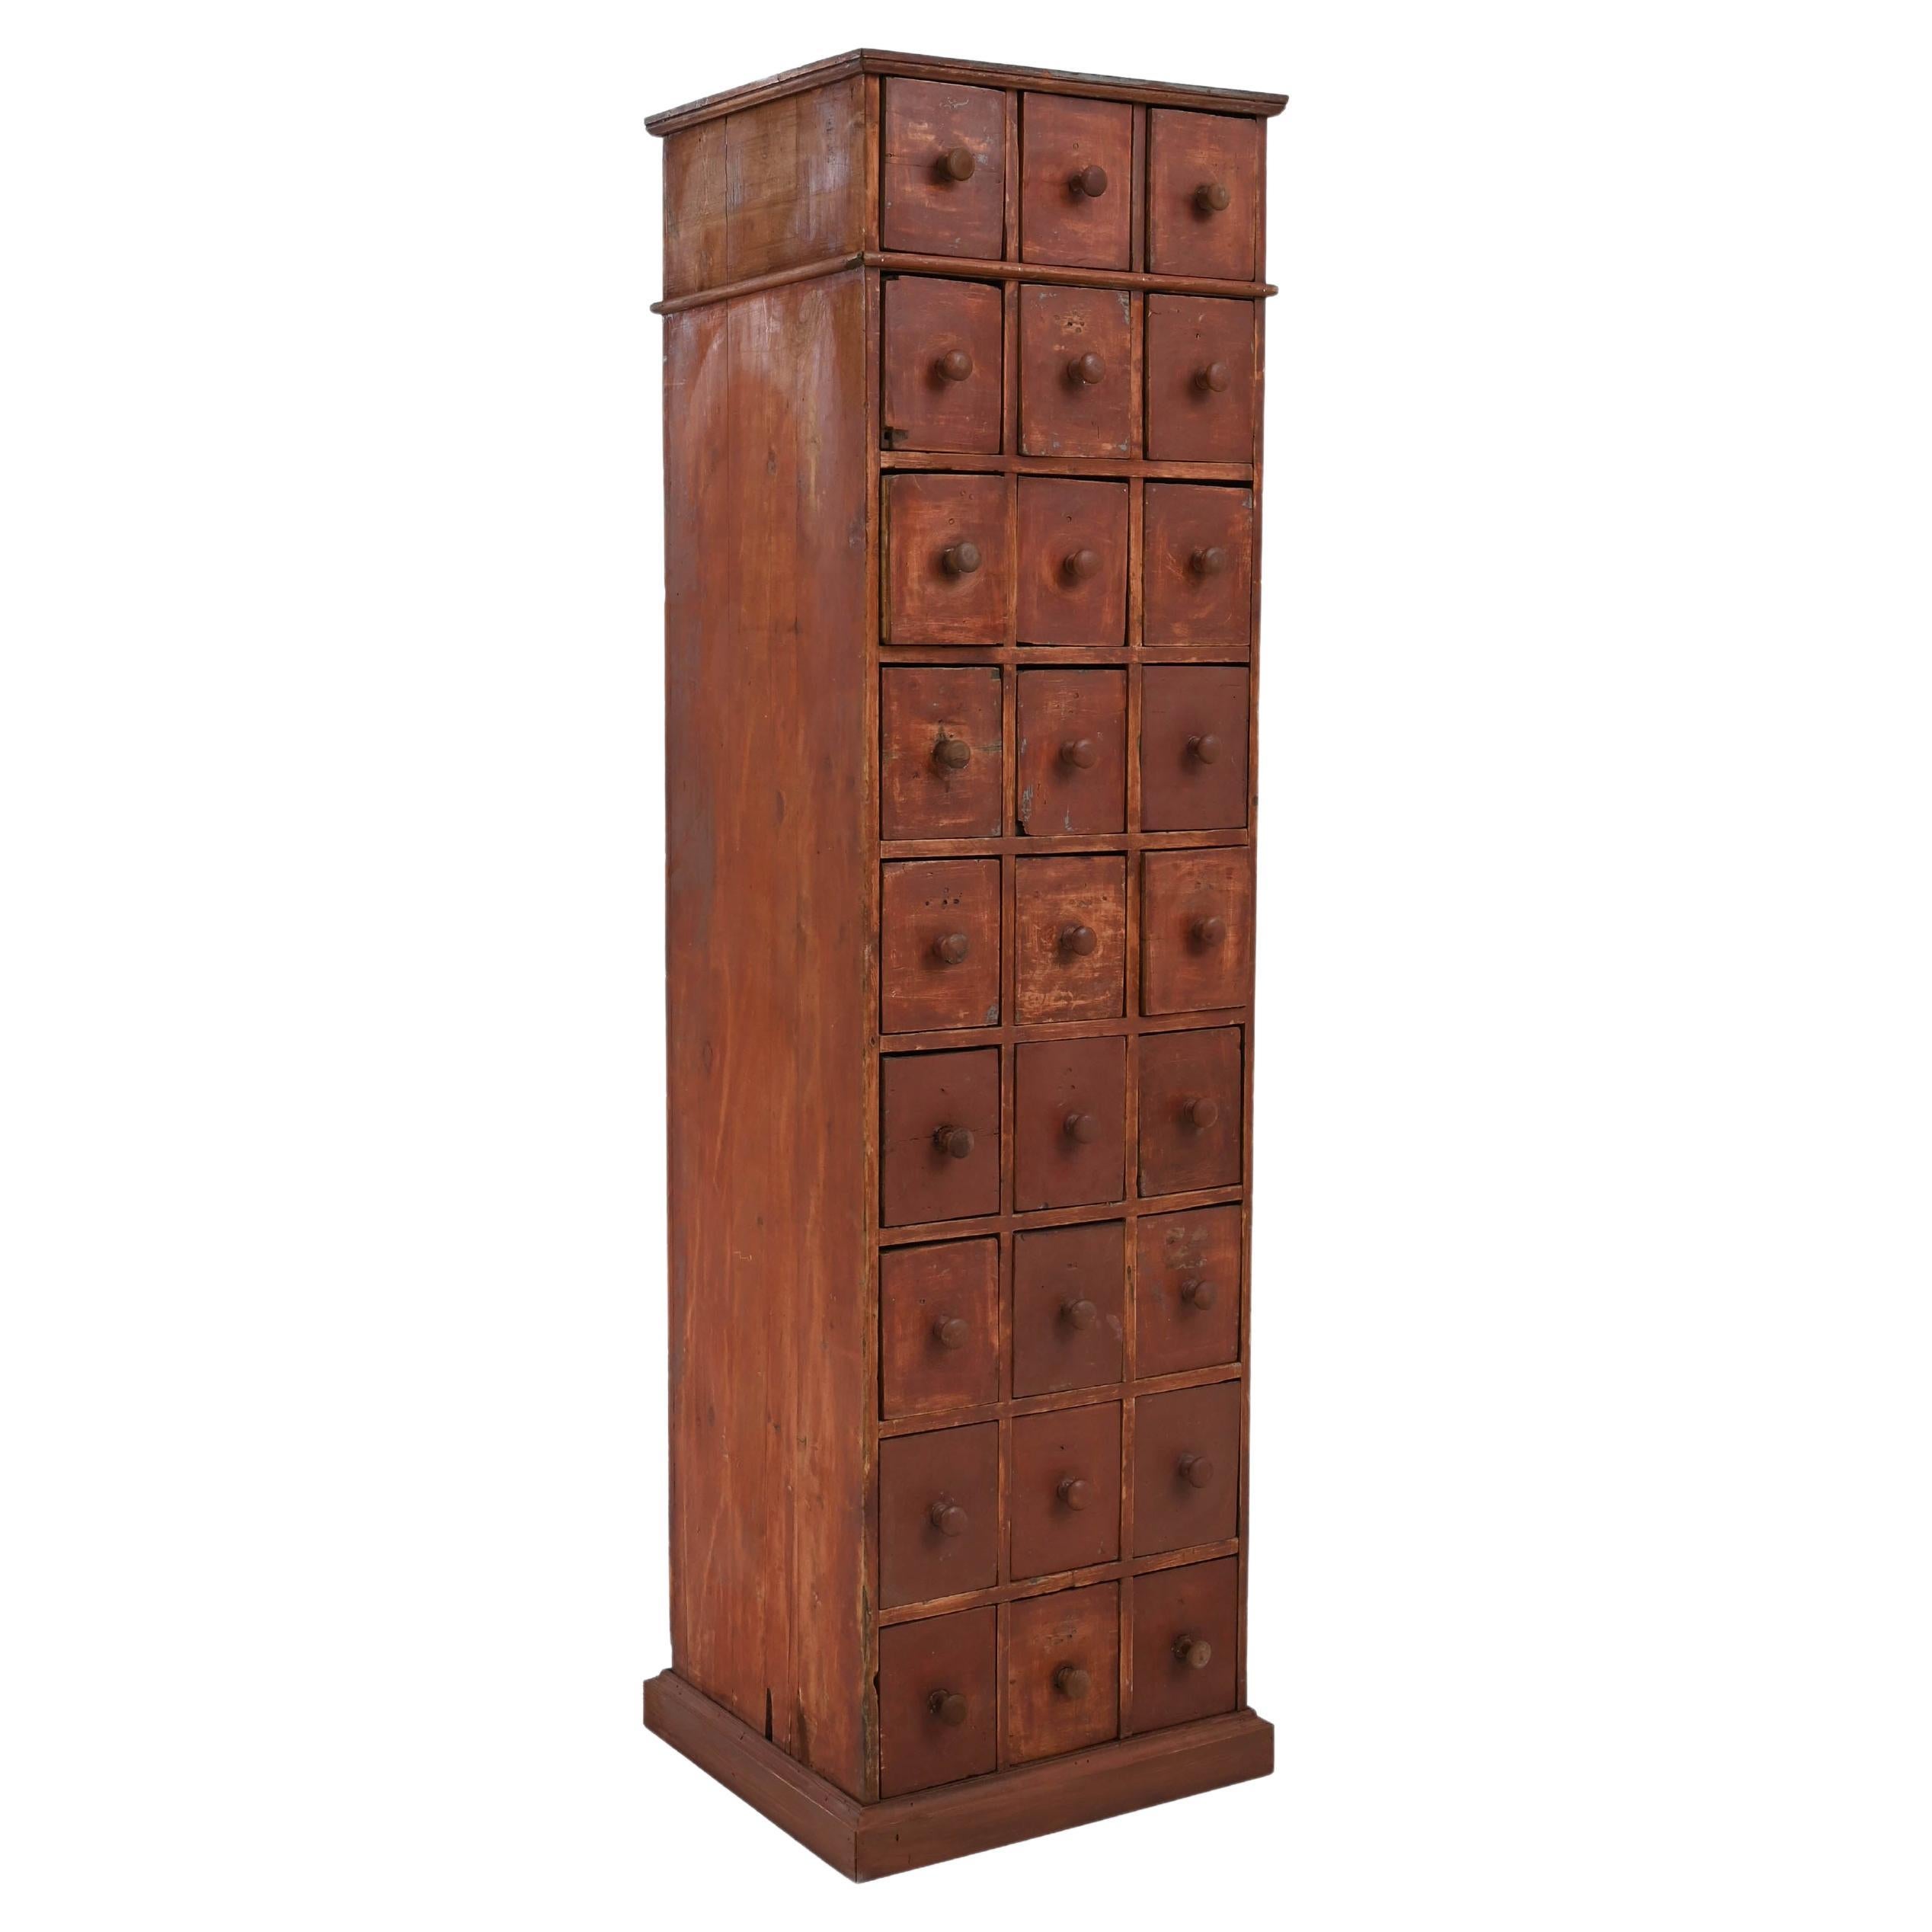 Antique French Wooden Catalogue Drawers